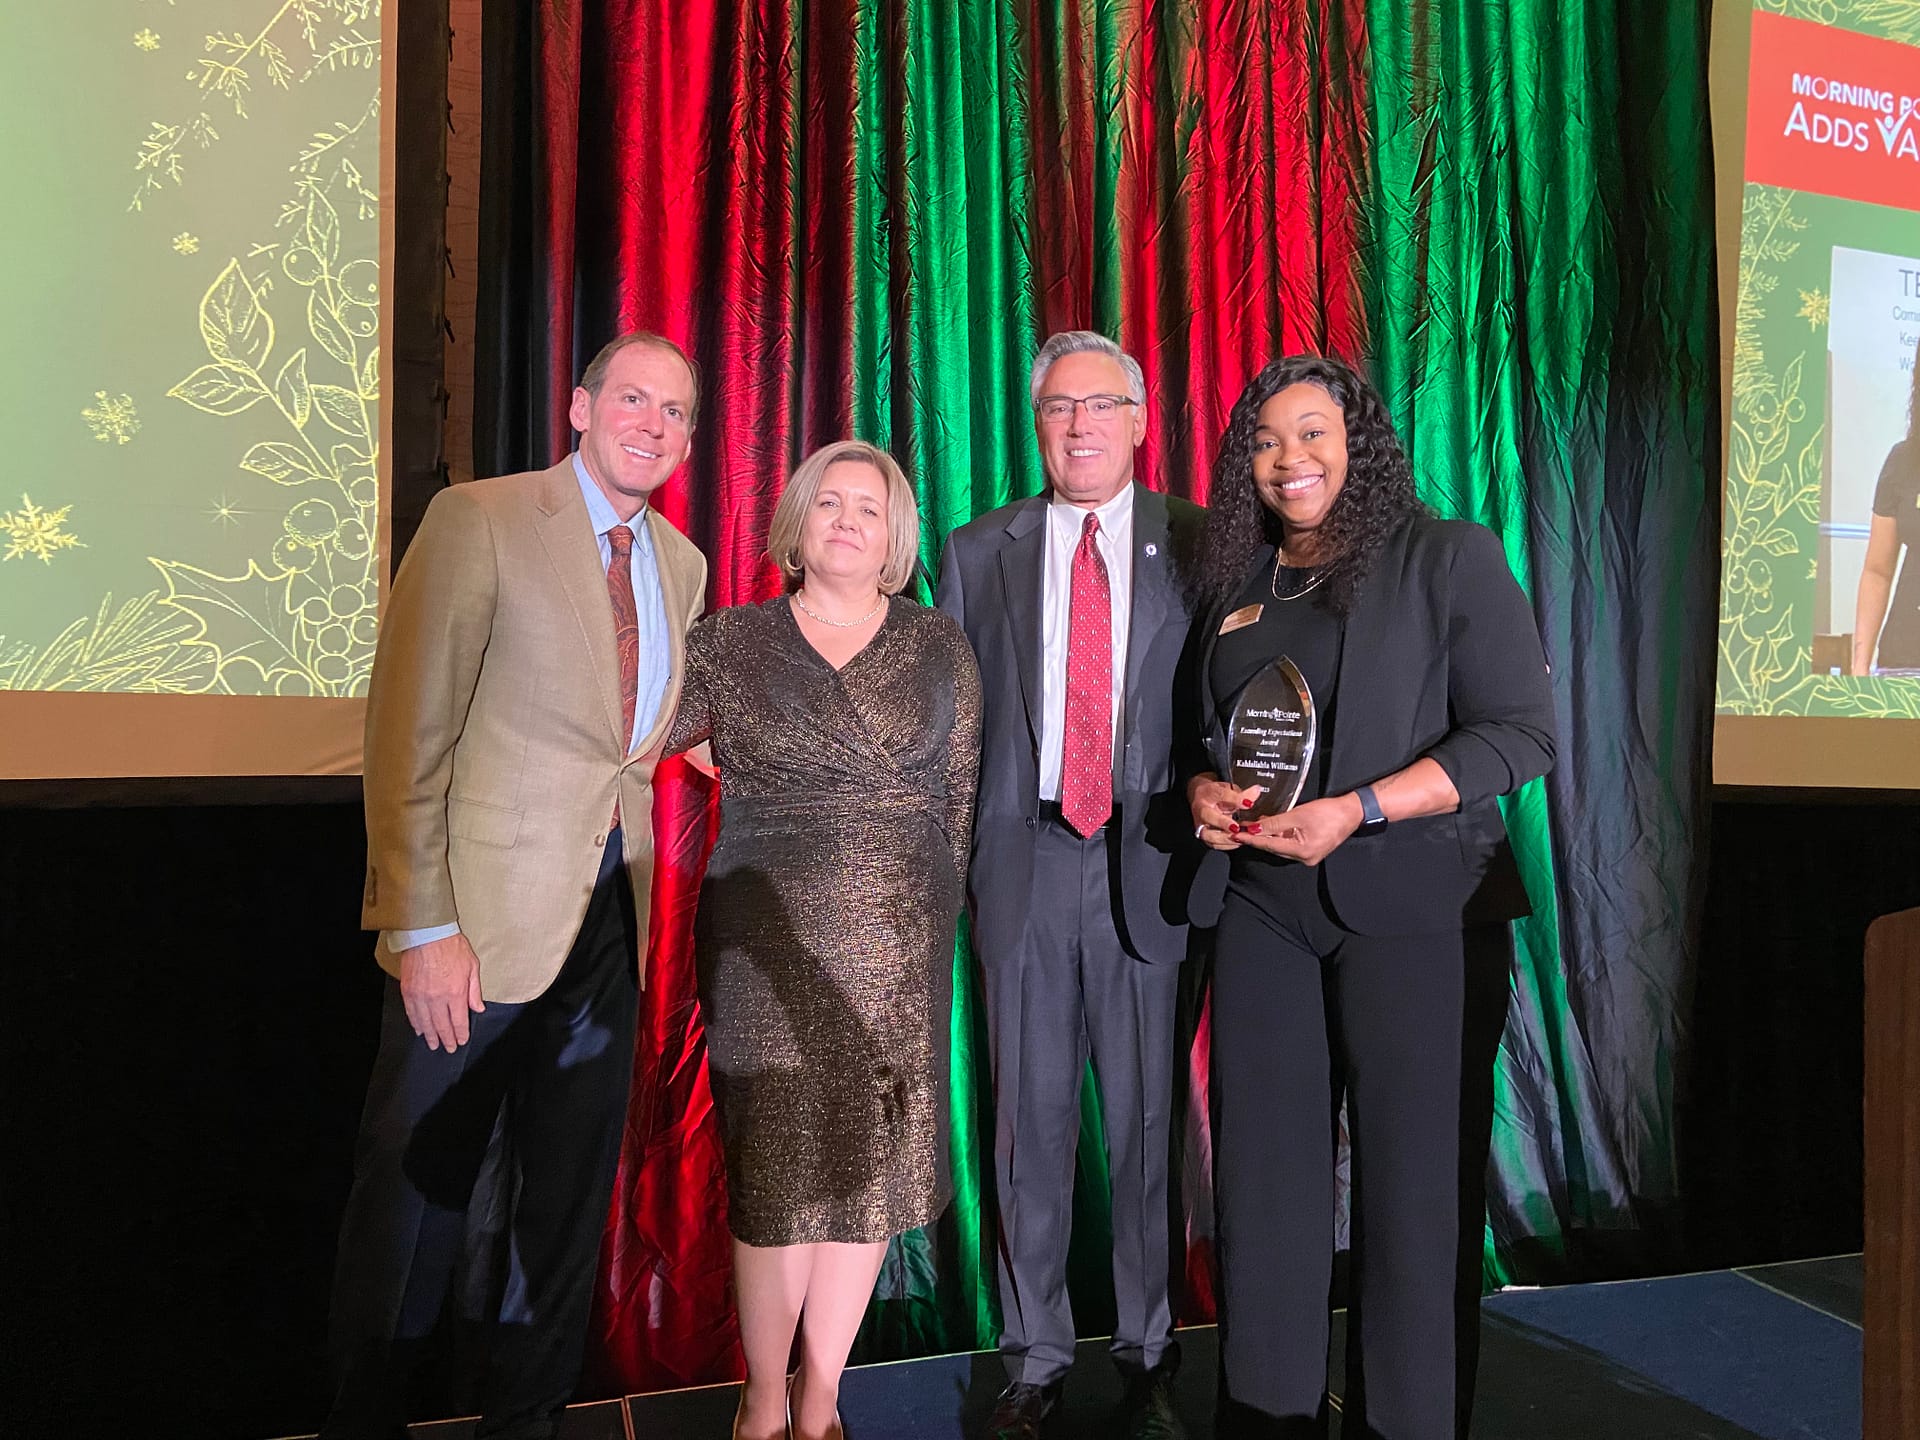 photo of, left to right: Franklin Farrow, Morning Pointe Senior Living Co-Founder and CEO; Tonie Venable, Vice President of Morning Pointe's Cumberland Region; Greg A. Vital, Morning Pointe Senior Living Co-Founder and President; and Kahlalishia Williams, Director of Nursing at Morning Pointe of Tuscaloosa and Exceeding Expectations Award winner for Nursing